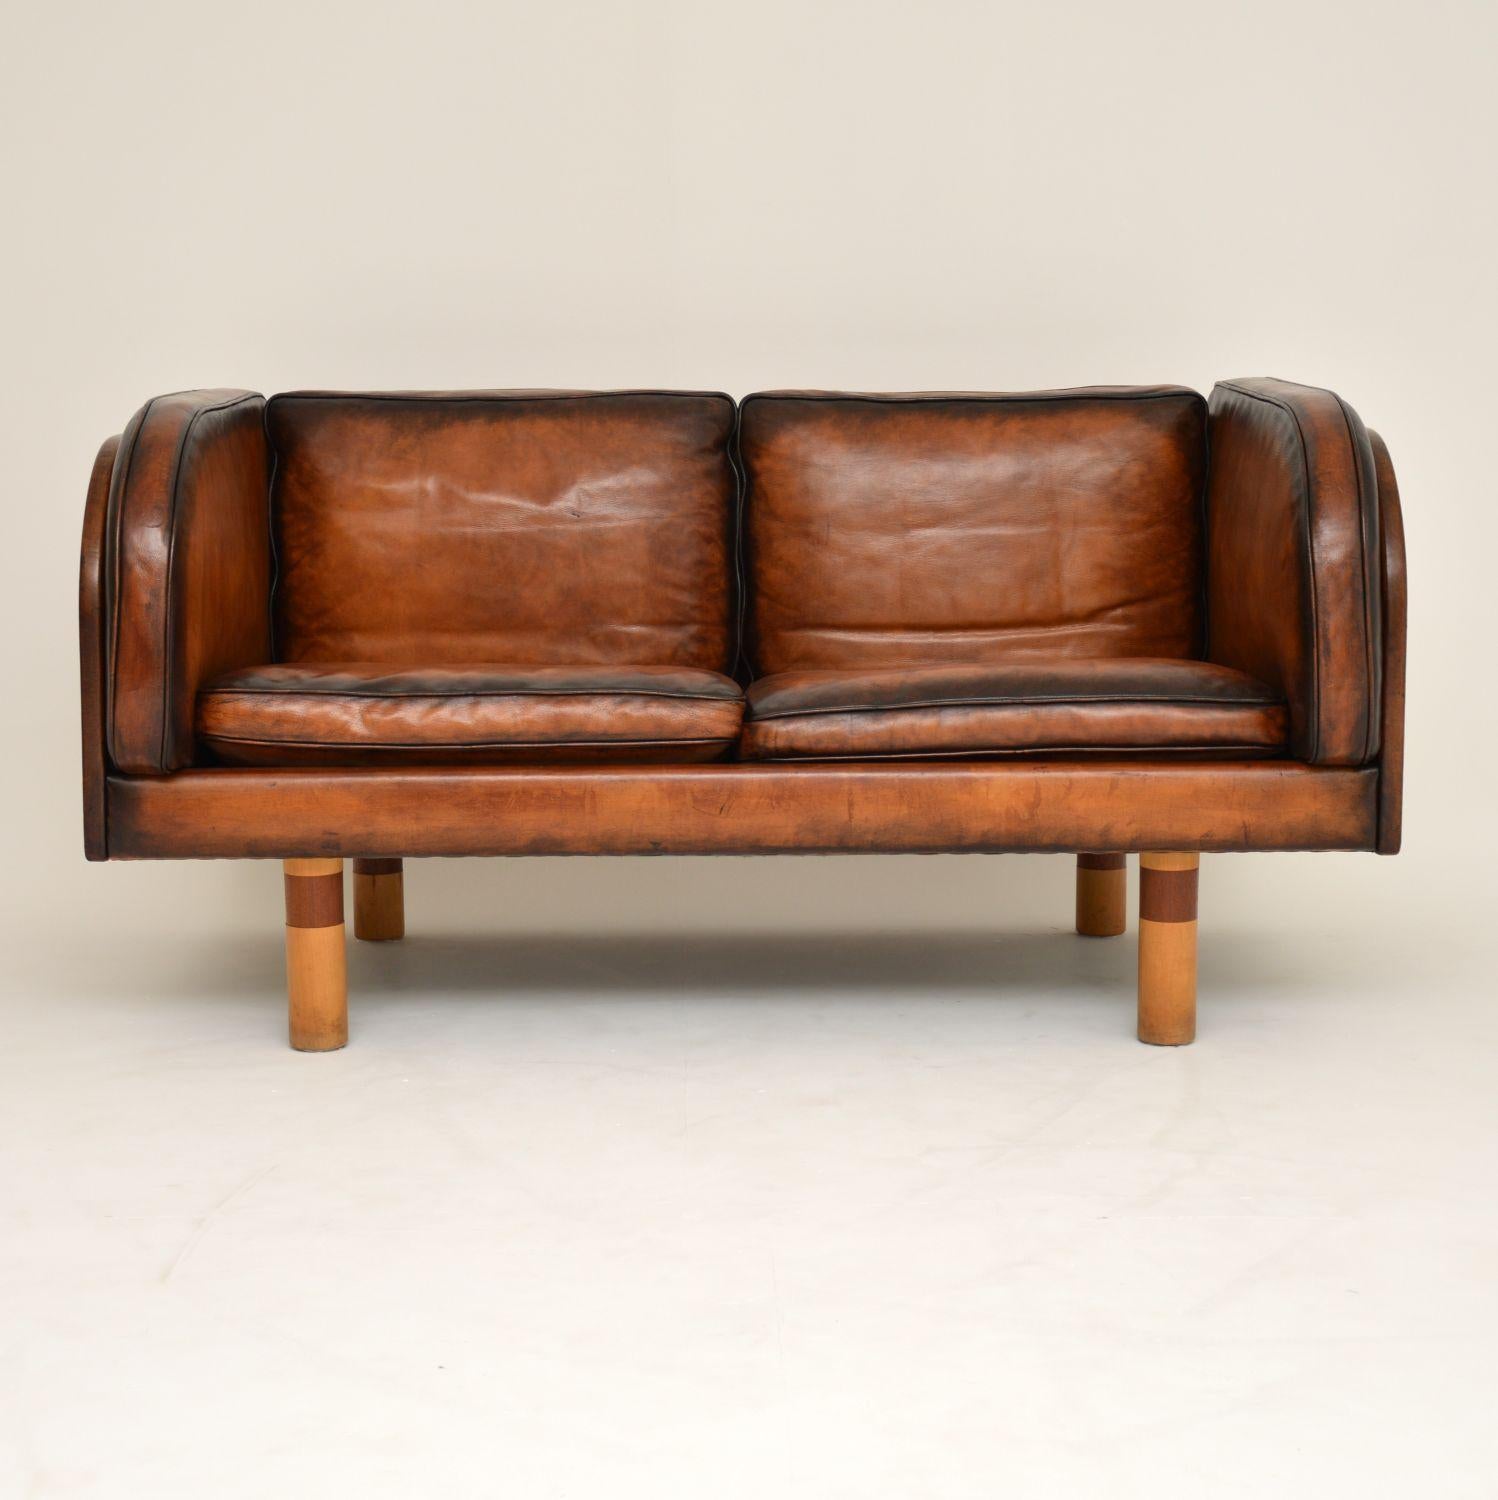 Late 20th Century Pair of Danish Leather Vintage Sofas by Jorgen Gammelgaard